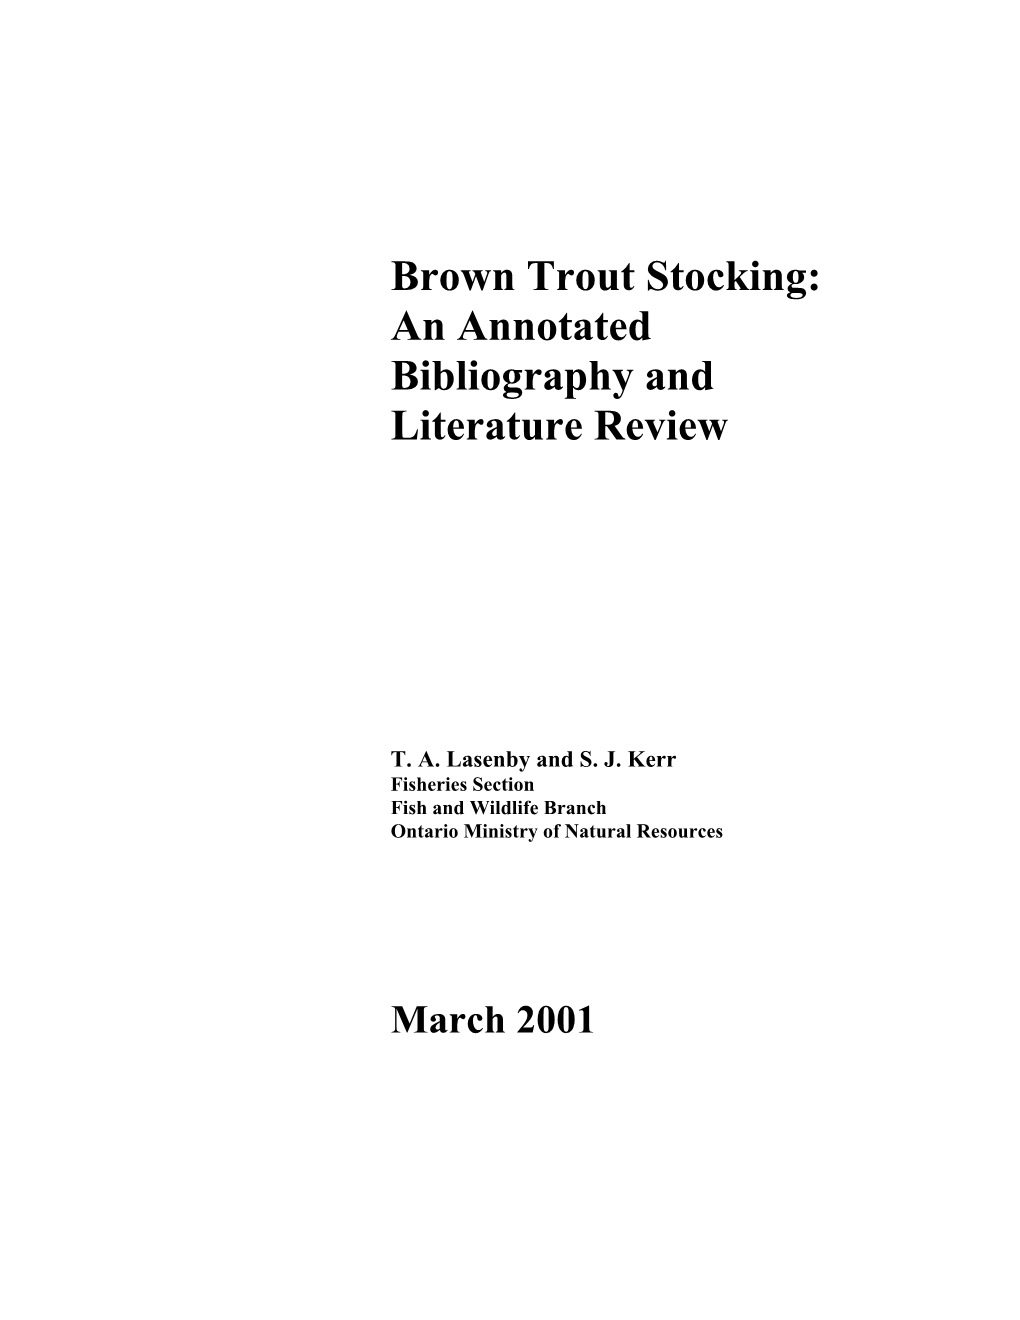 Brown Trout Stocking: an Annotated Bibliography and Literature Review